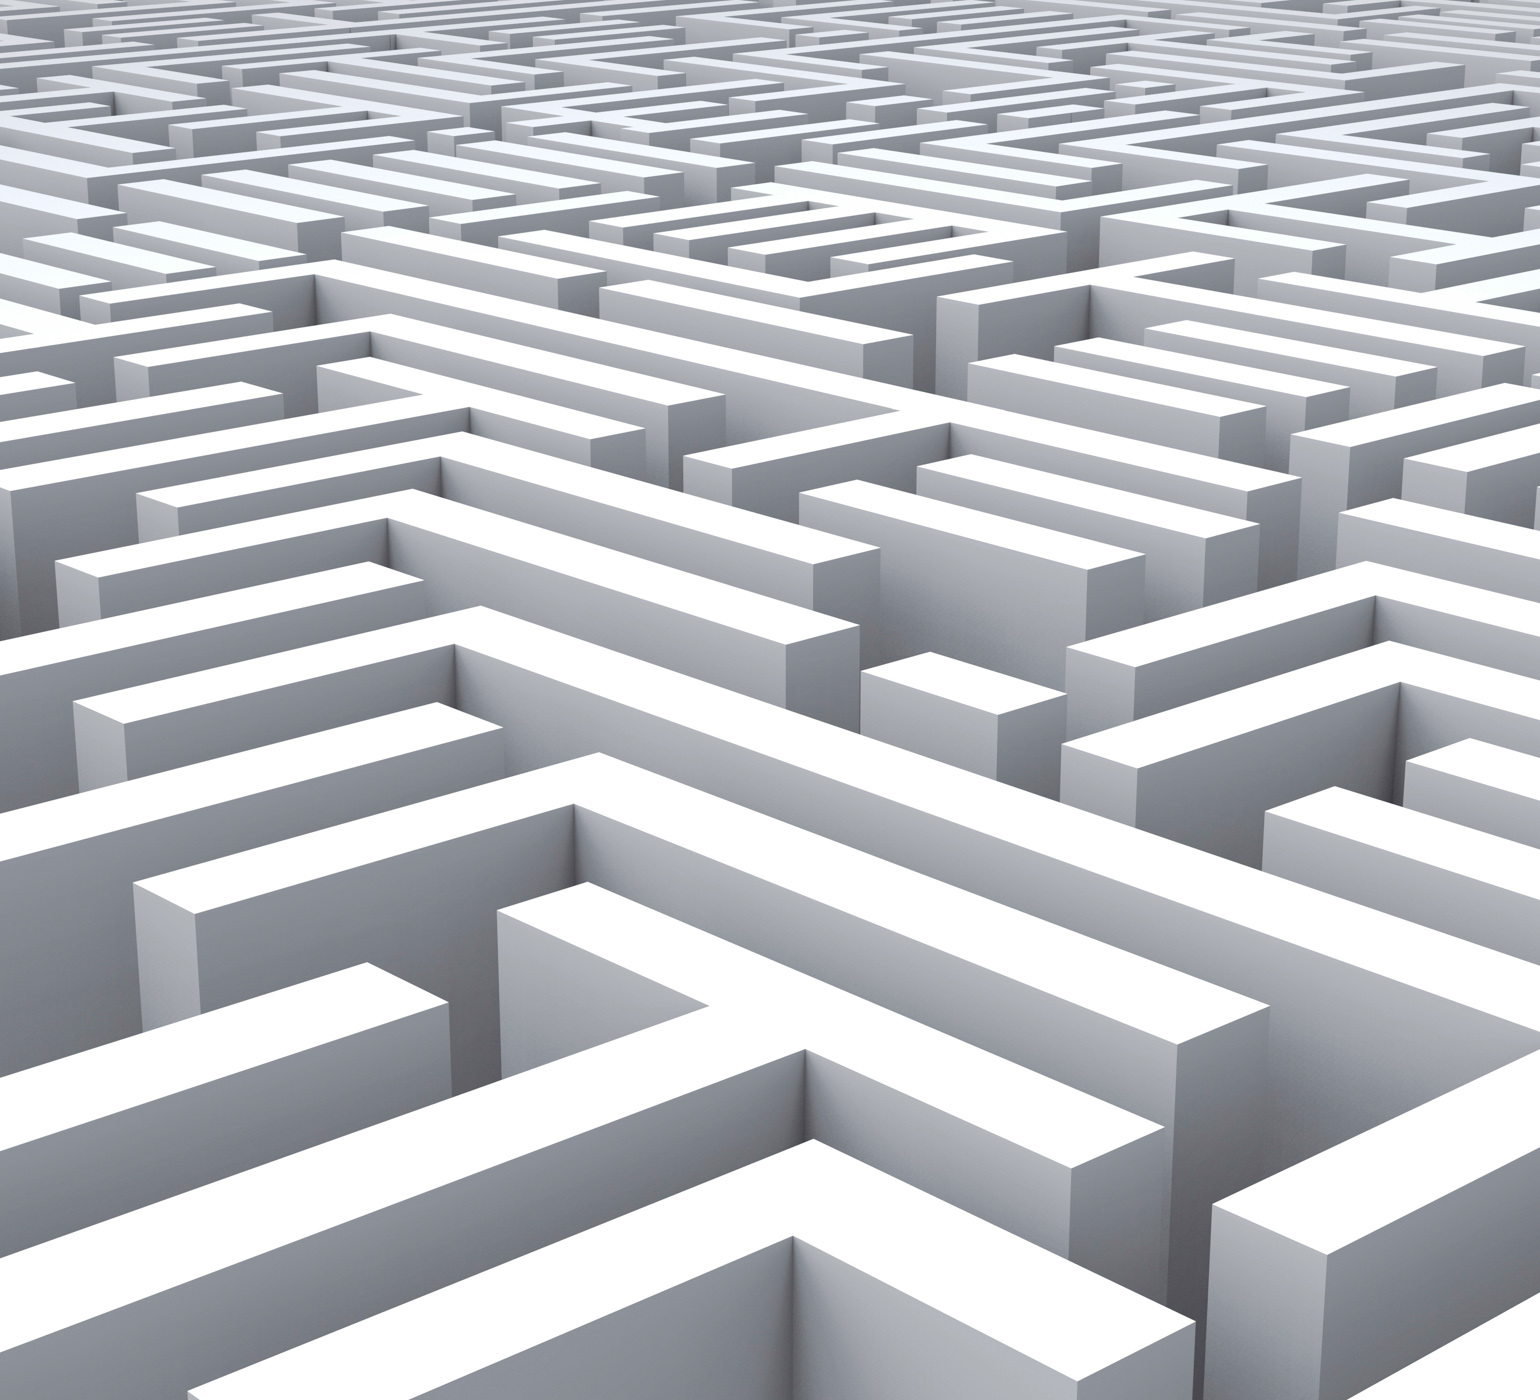 Maze Shows Problem Or Complexity, Lost, Solving, Puzzling, Puzzle, HQ Photo